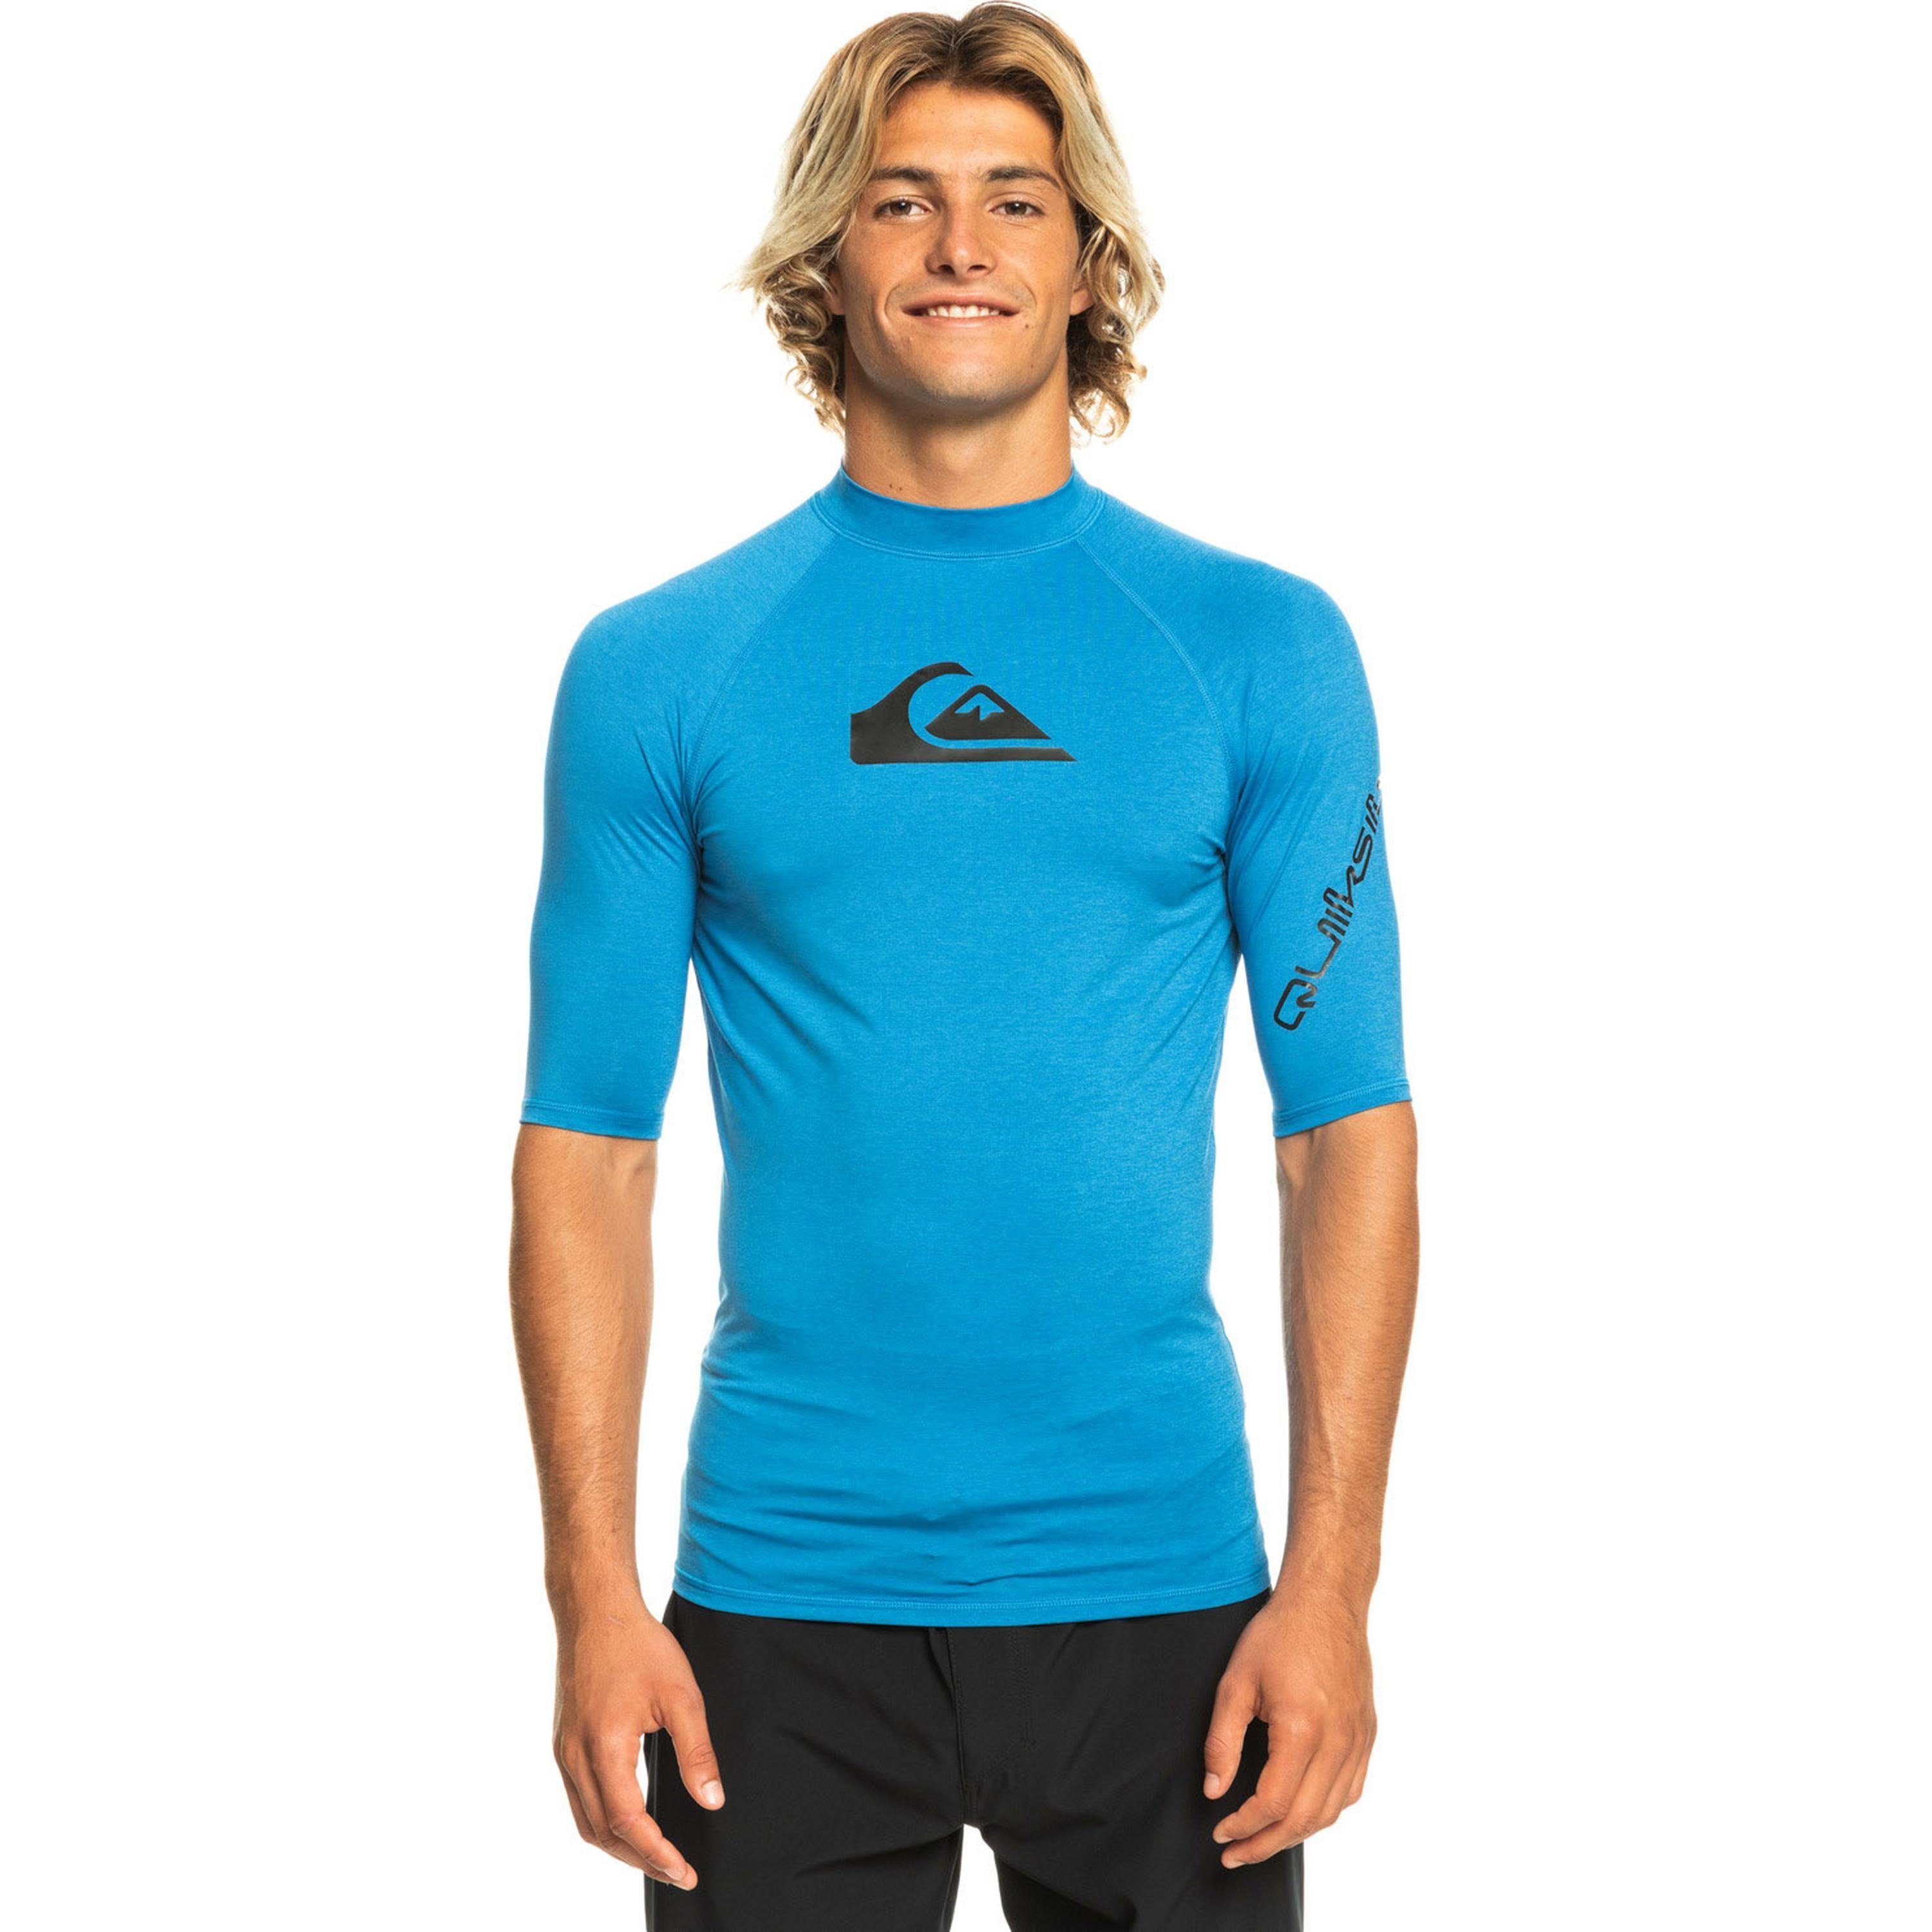 TIME T-Shirt Quiksilver ALL blue heather snorkel